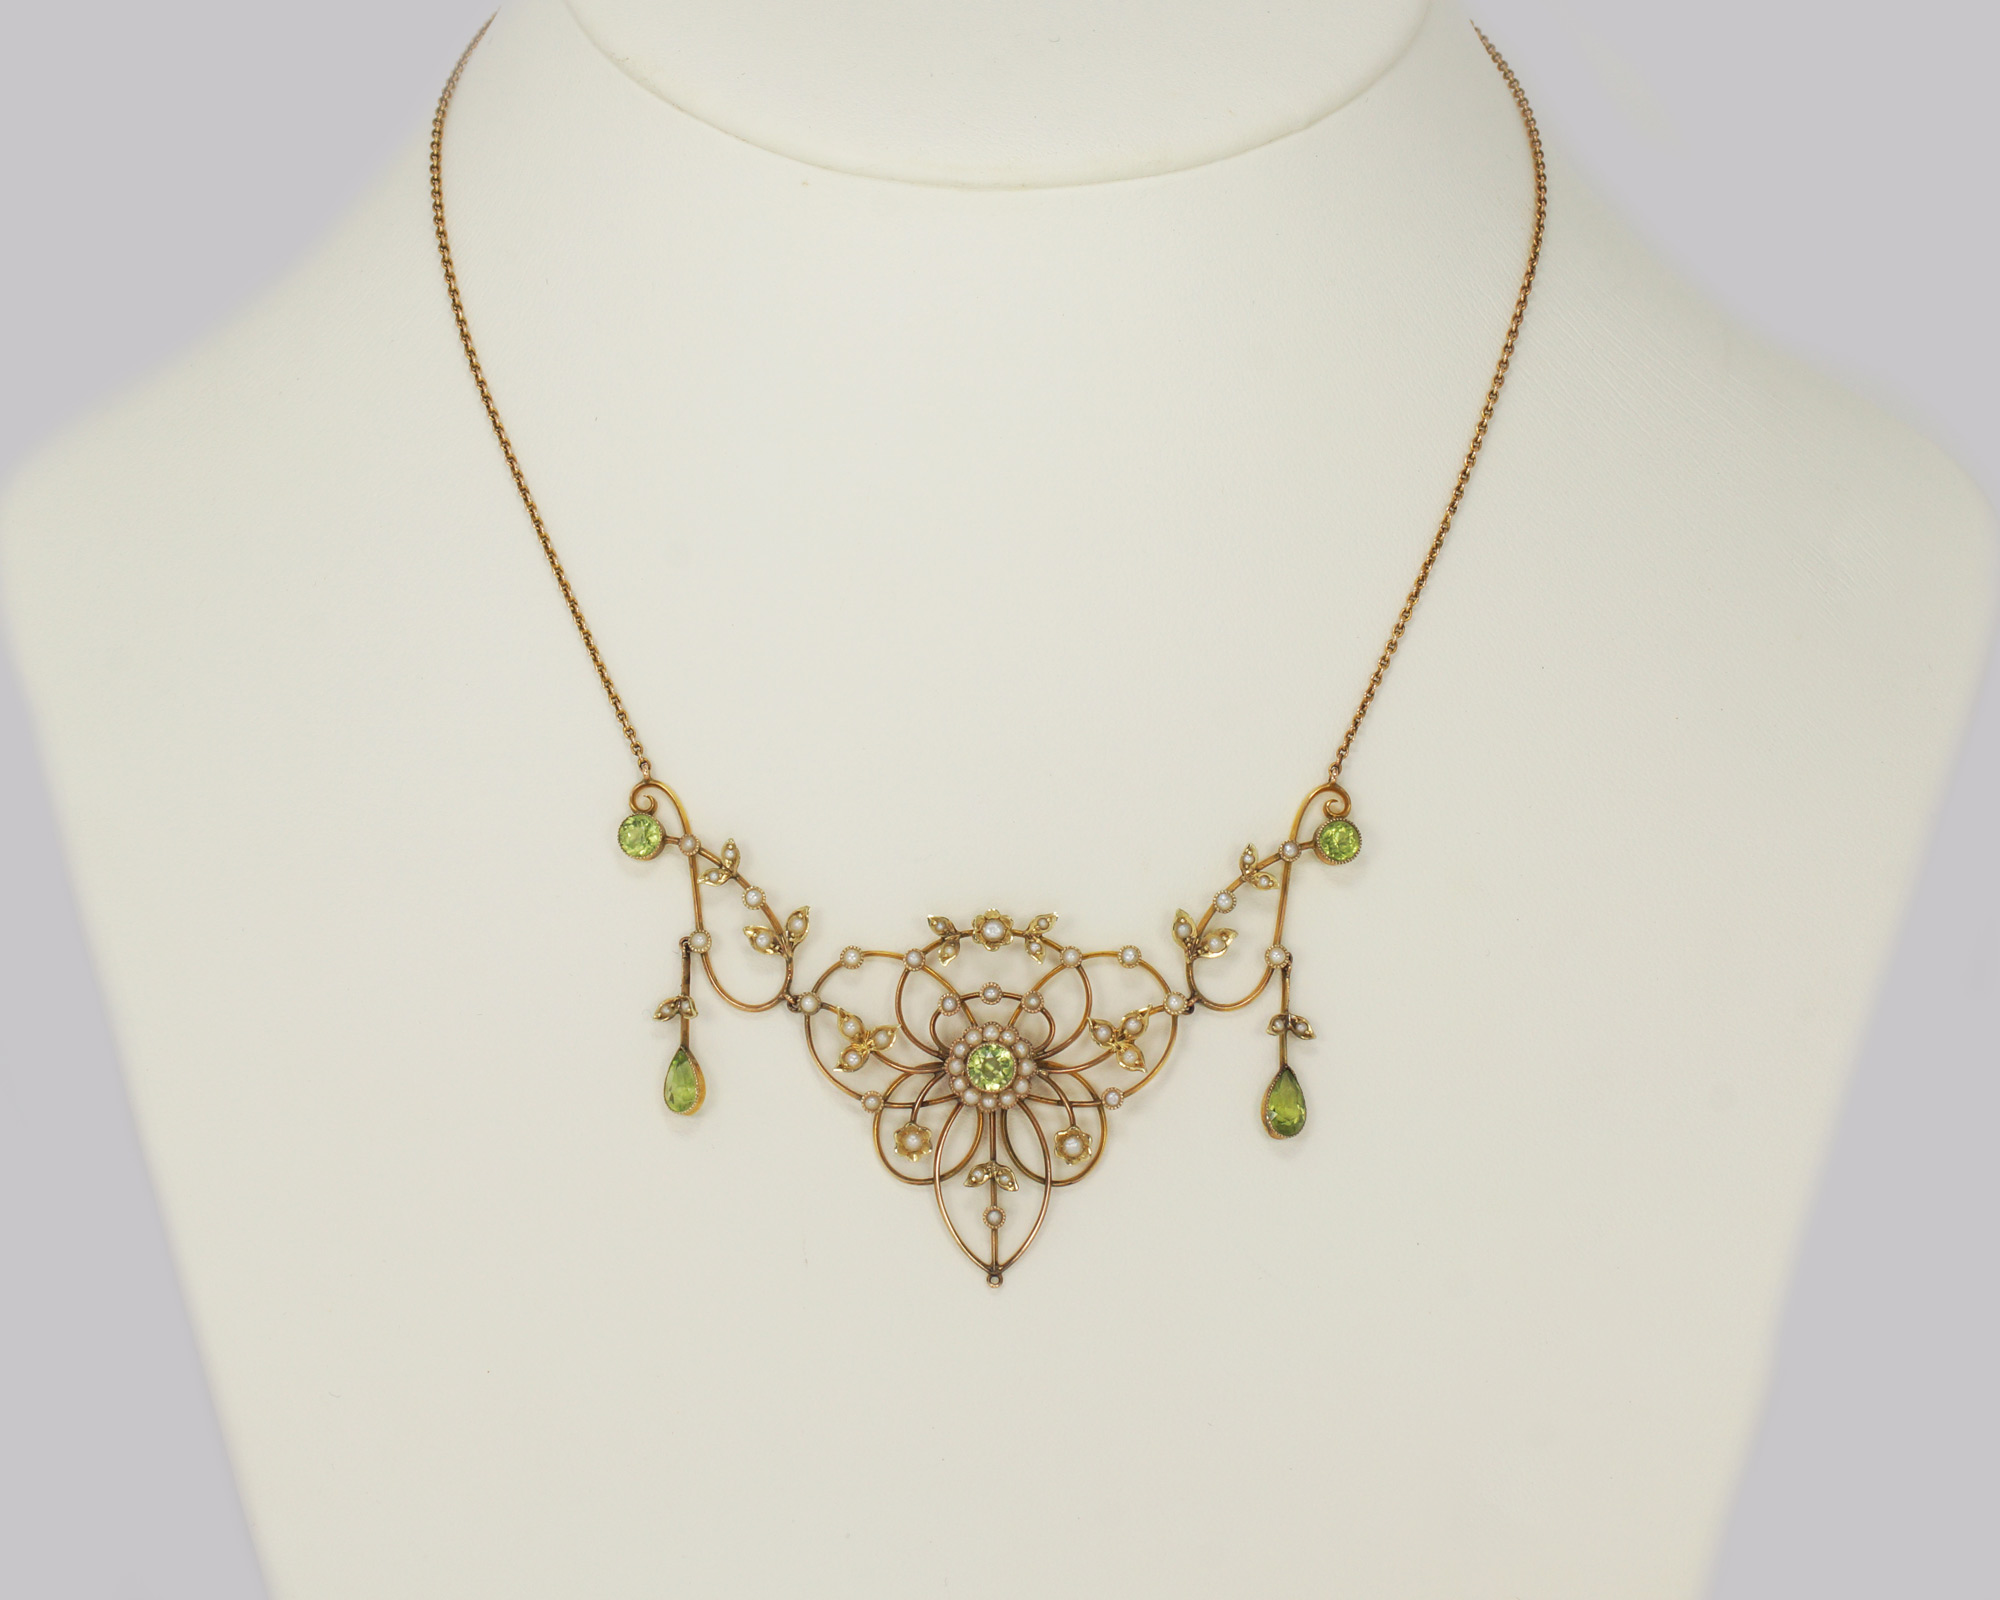 Antique Peridot & Pearl Necklace - The Chelsea Bijouterie